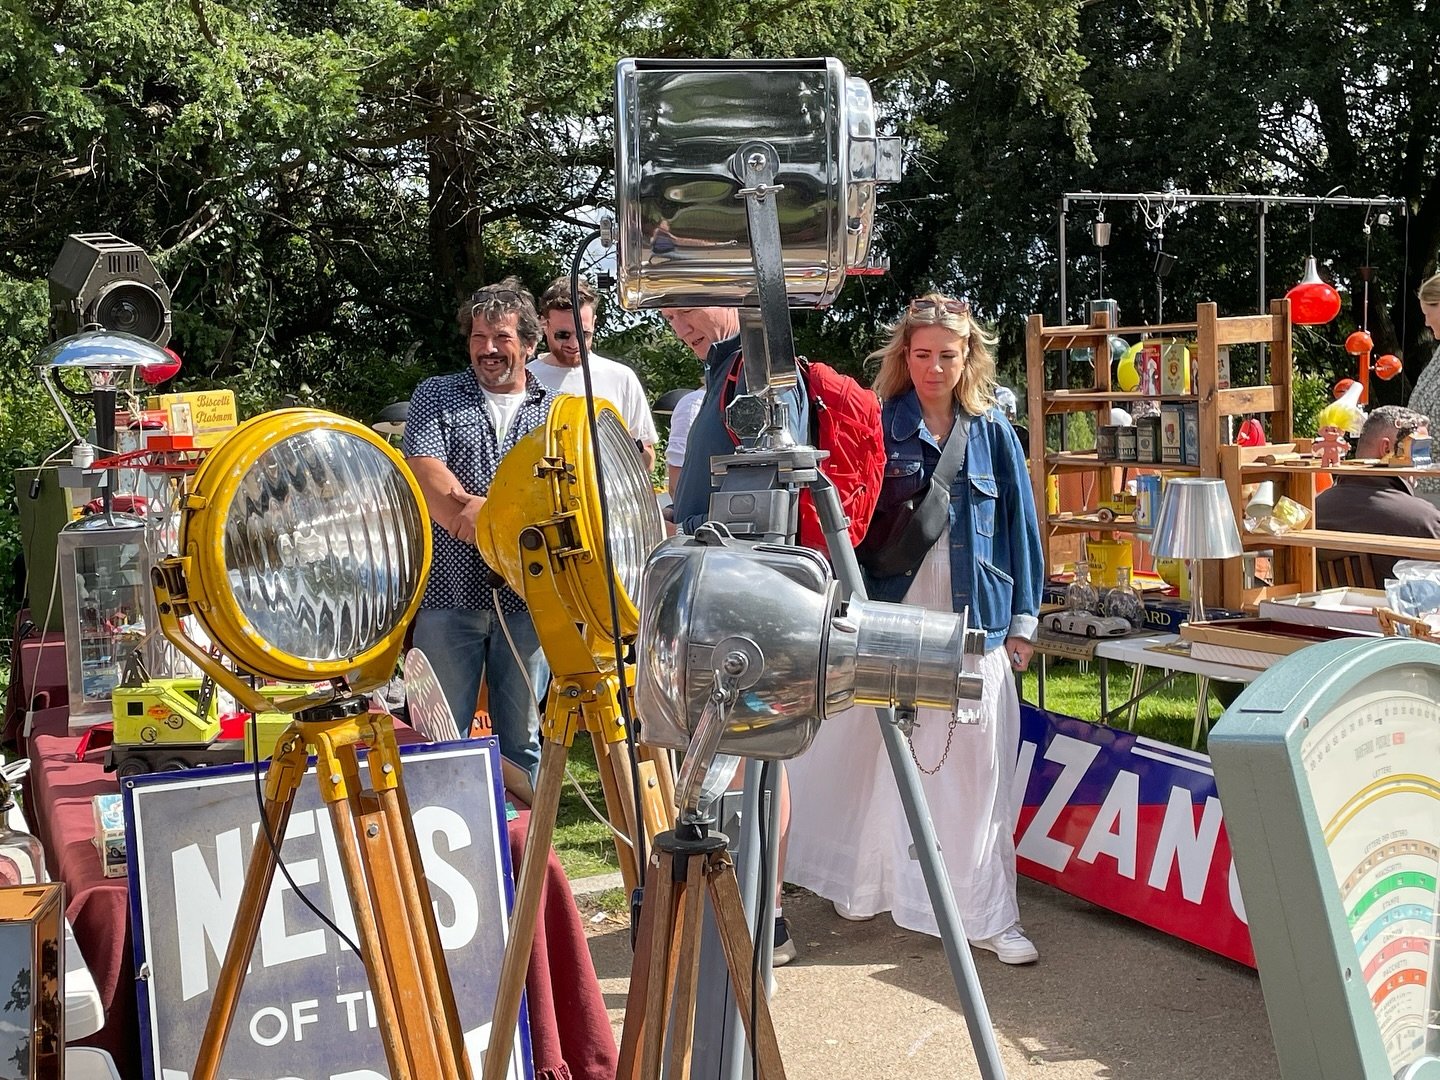 Vintage Market at the Mansion - Bank Holiday Monday 6th May
@beckenhamplace 🌿🏛☀️

50 great vintage dealers with thousands of things to discover including mid 20th-century furniture, lighting, ceramics and homeware, original 60s posters, prints, rec